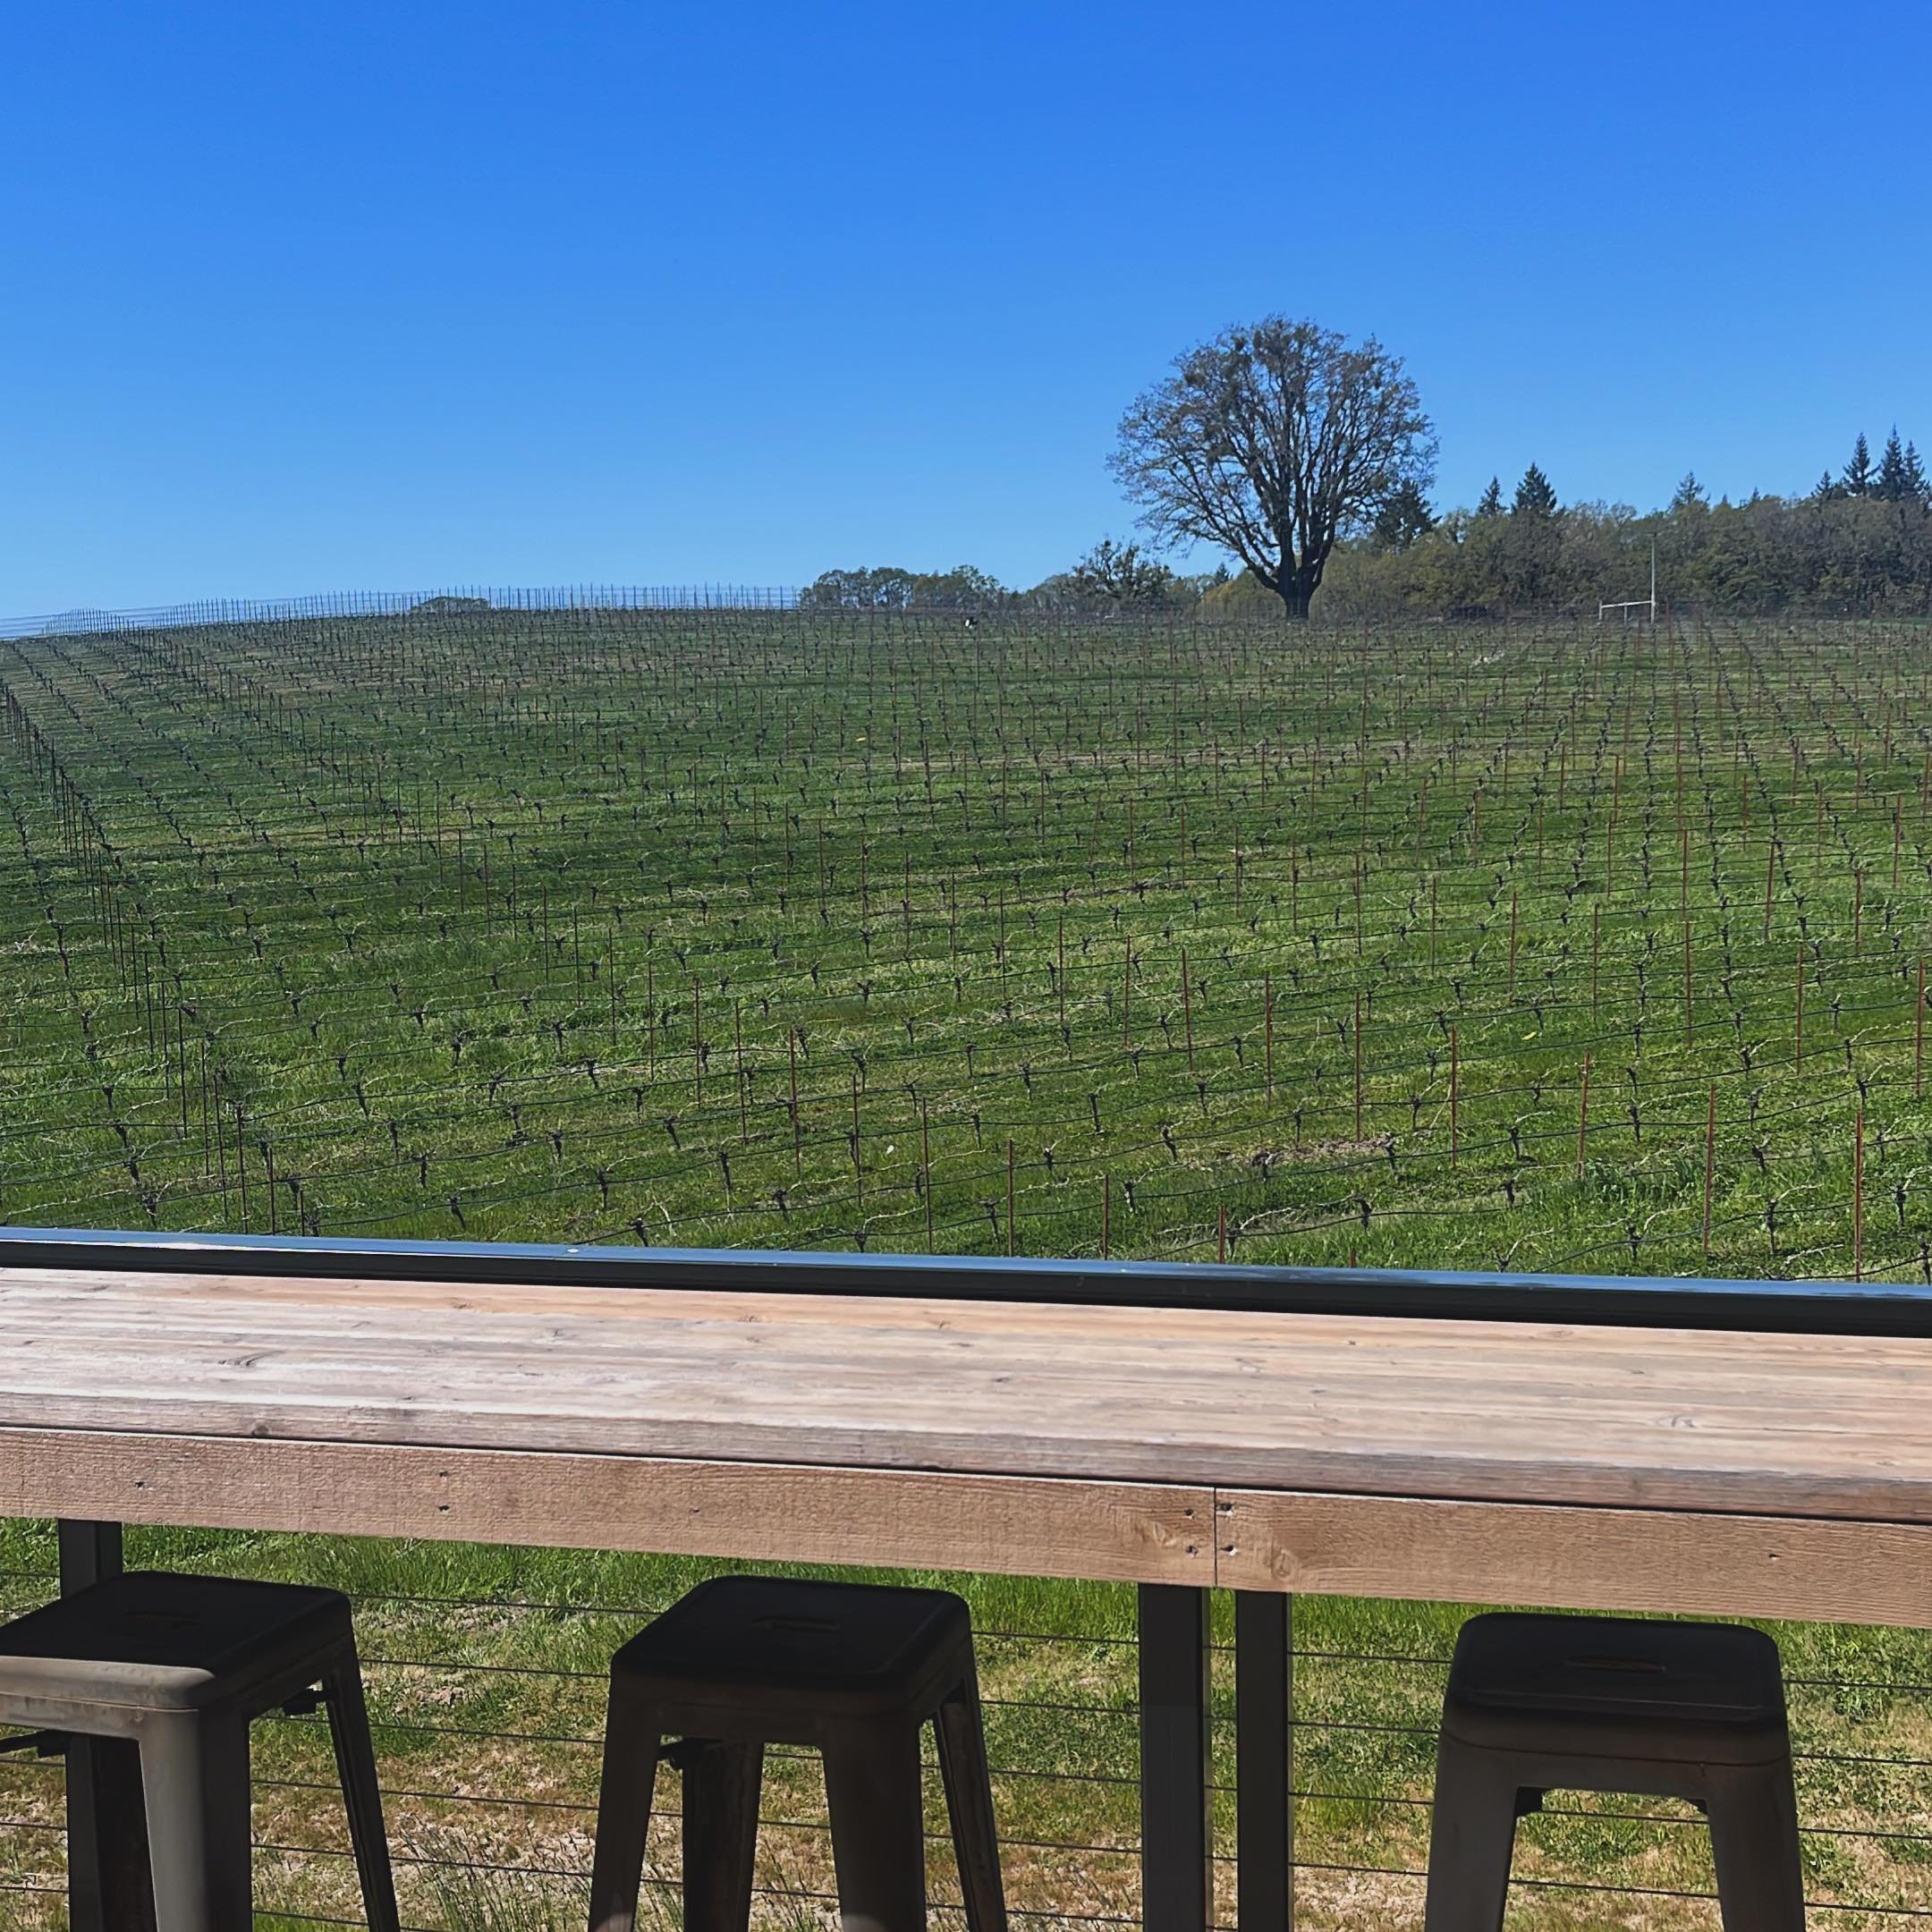 It&rsquo;s Springtime in the vines and we couldn&rsquo;t be happier!

We&rsquo;ve got the @yamhillcarlton AVA Spring tasting on Saturday, and we&rsquo;ll have our rooftop seating open all weekend for you to enjoy!

On top of all that we&rsquo;ve got 